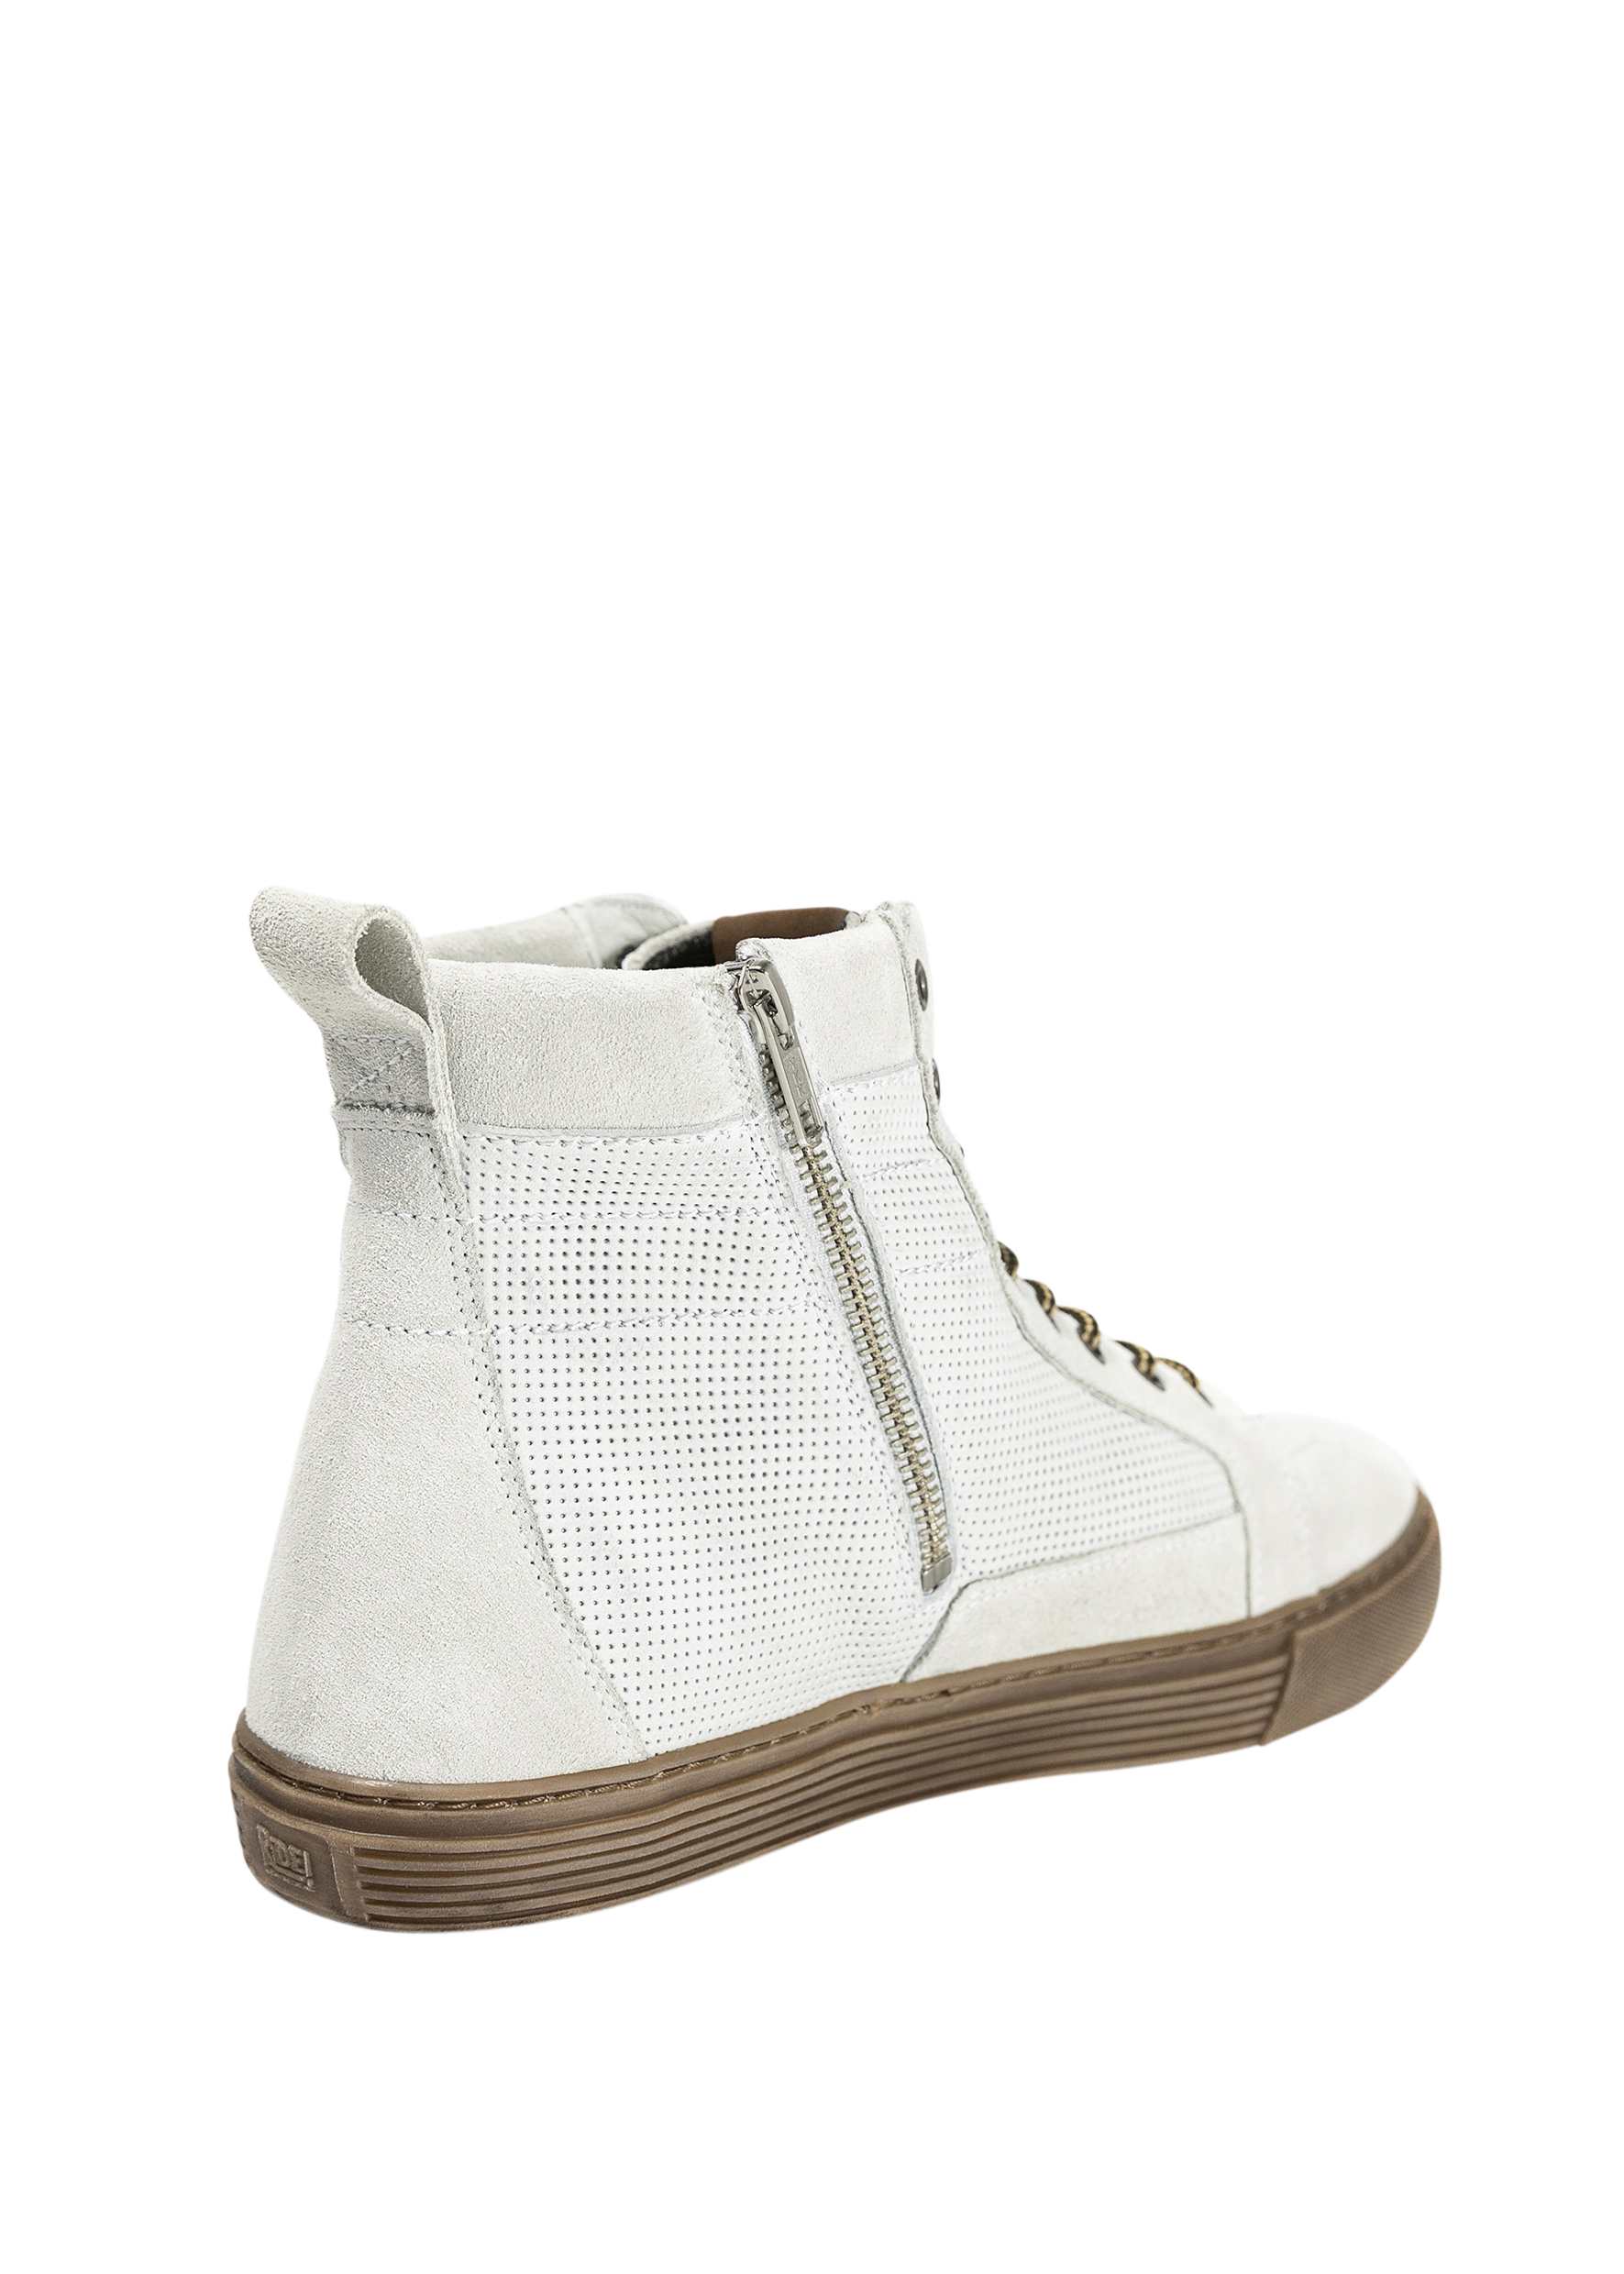 NEO RIDING BOOTS | WHITE/BROWN